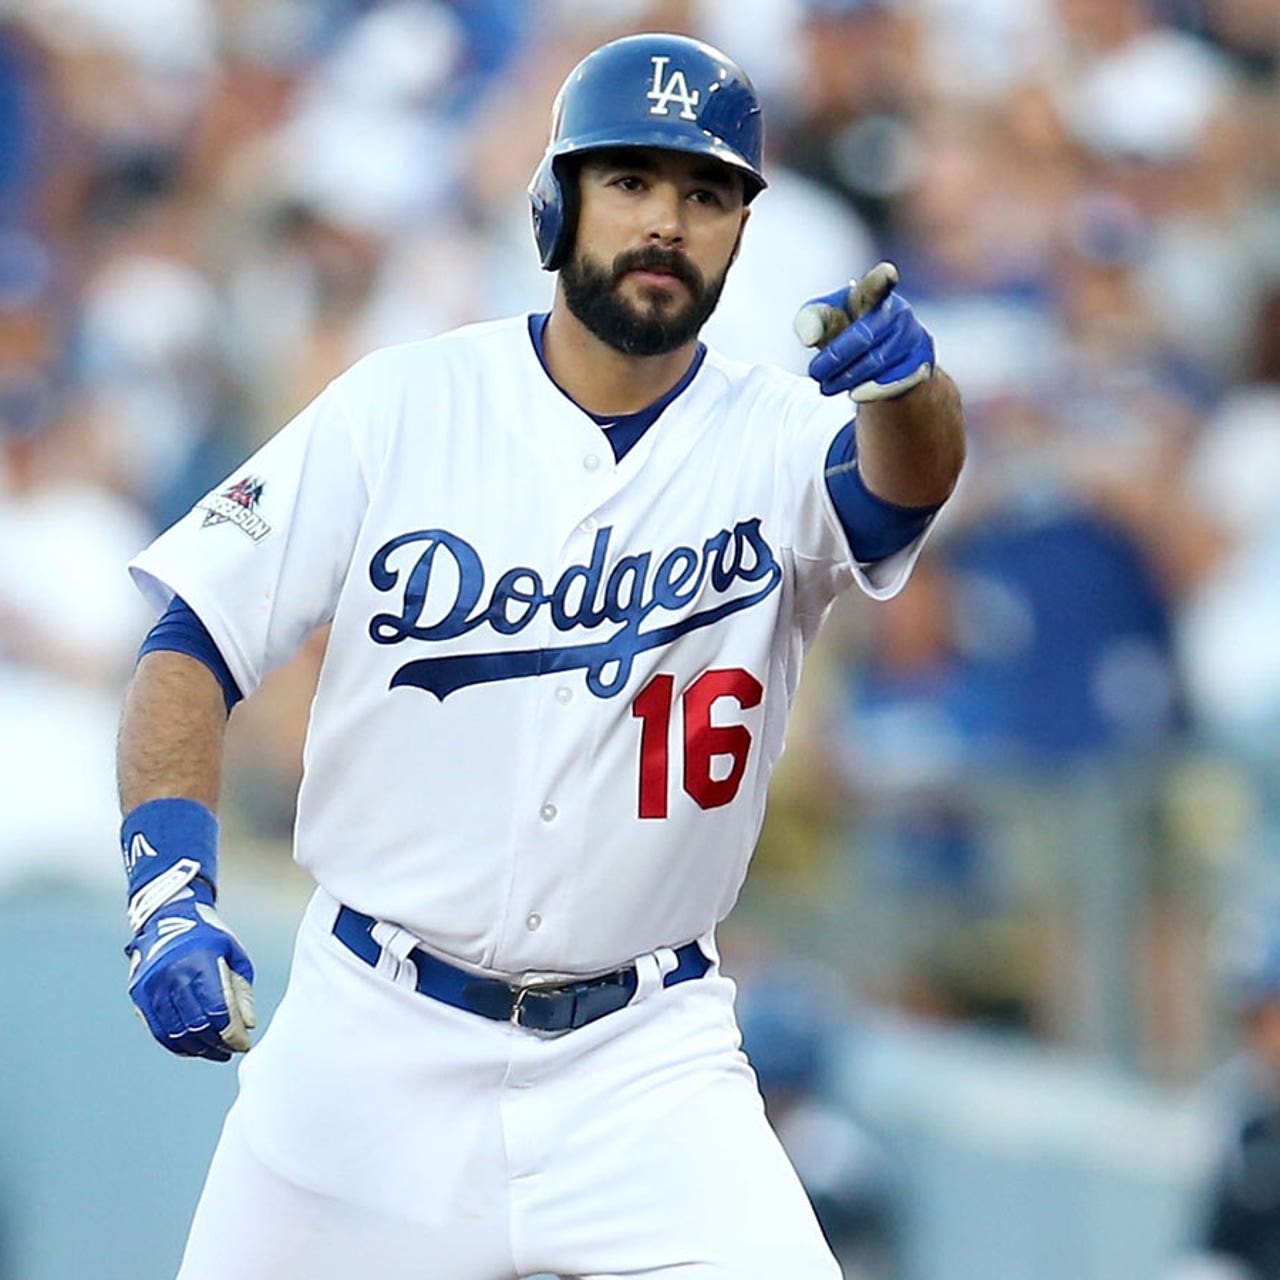 Report: White Sox 'exploring' Dodgers OF Andre Ethier